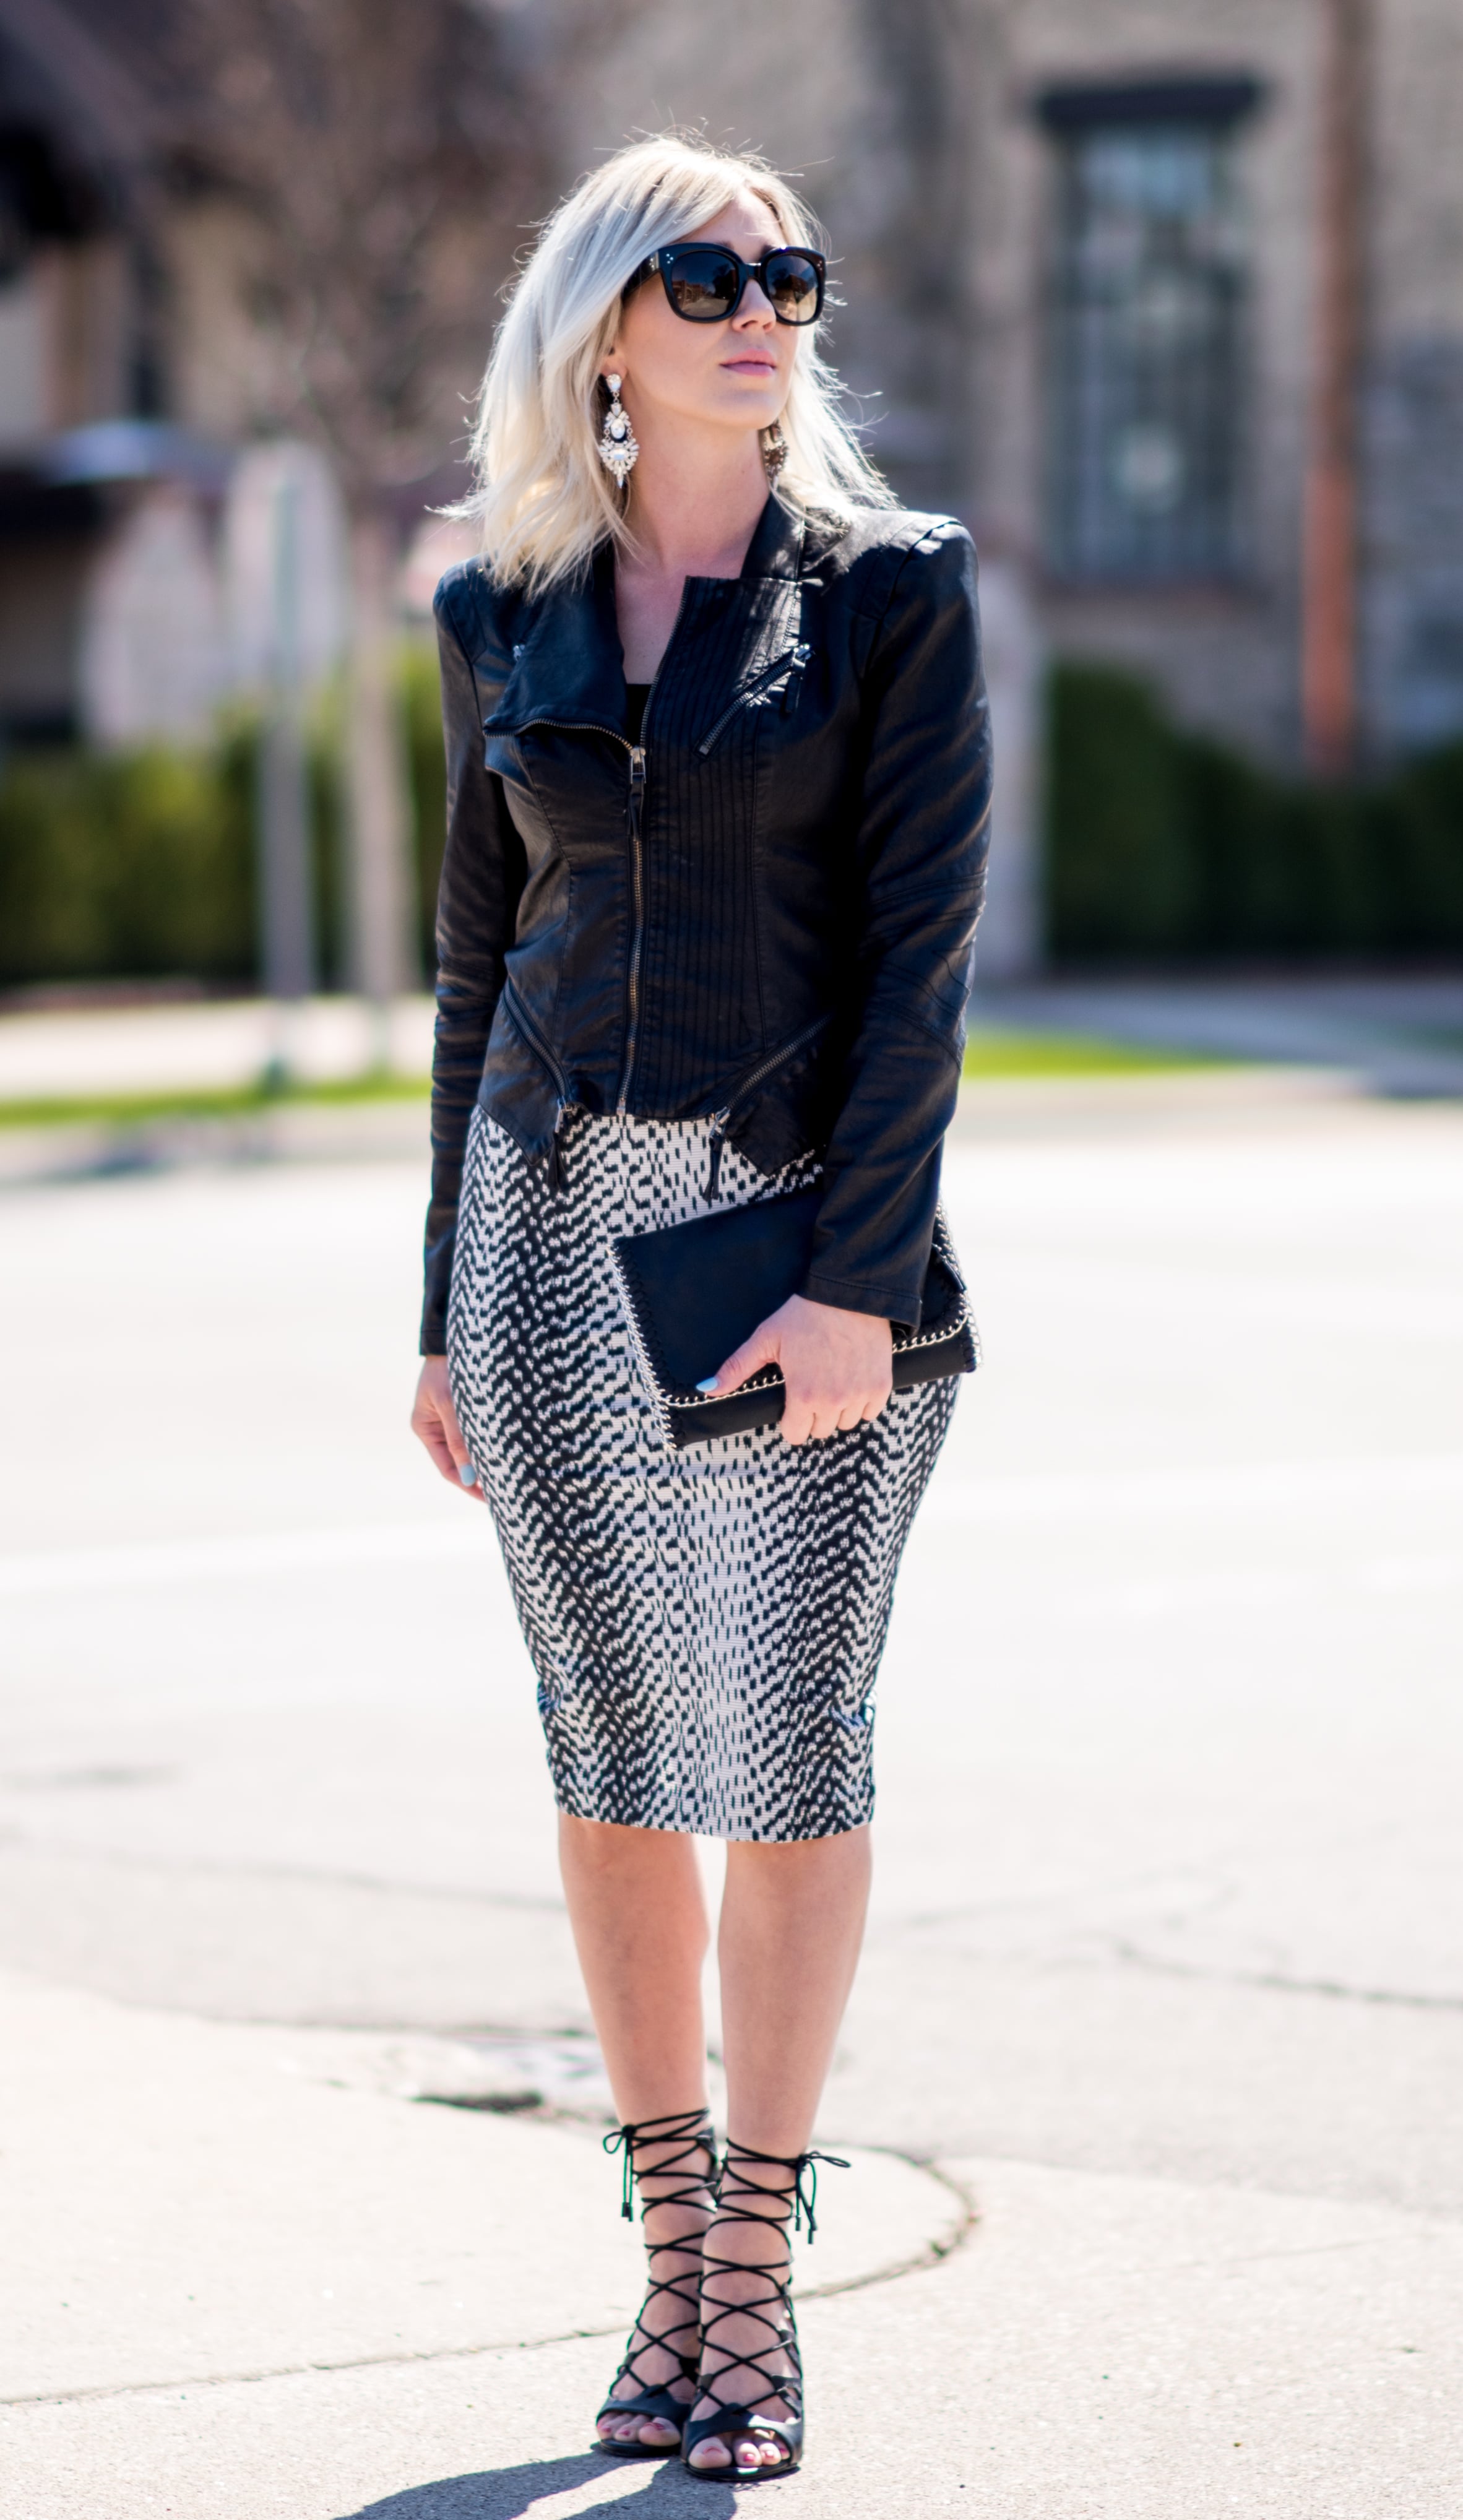 Pencil Skirt & Faux Leather Jacket | Life's Candy Jar